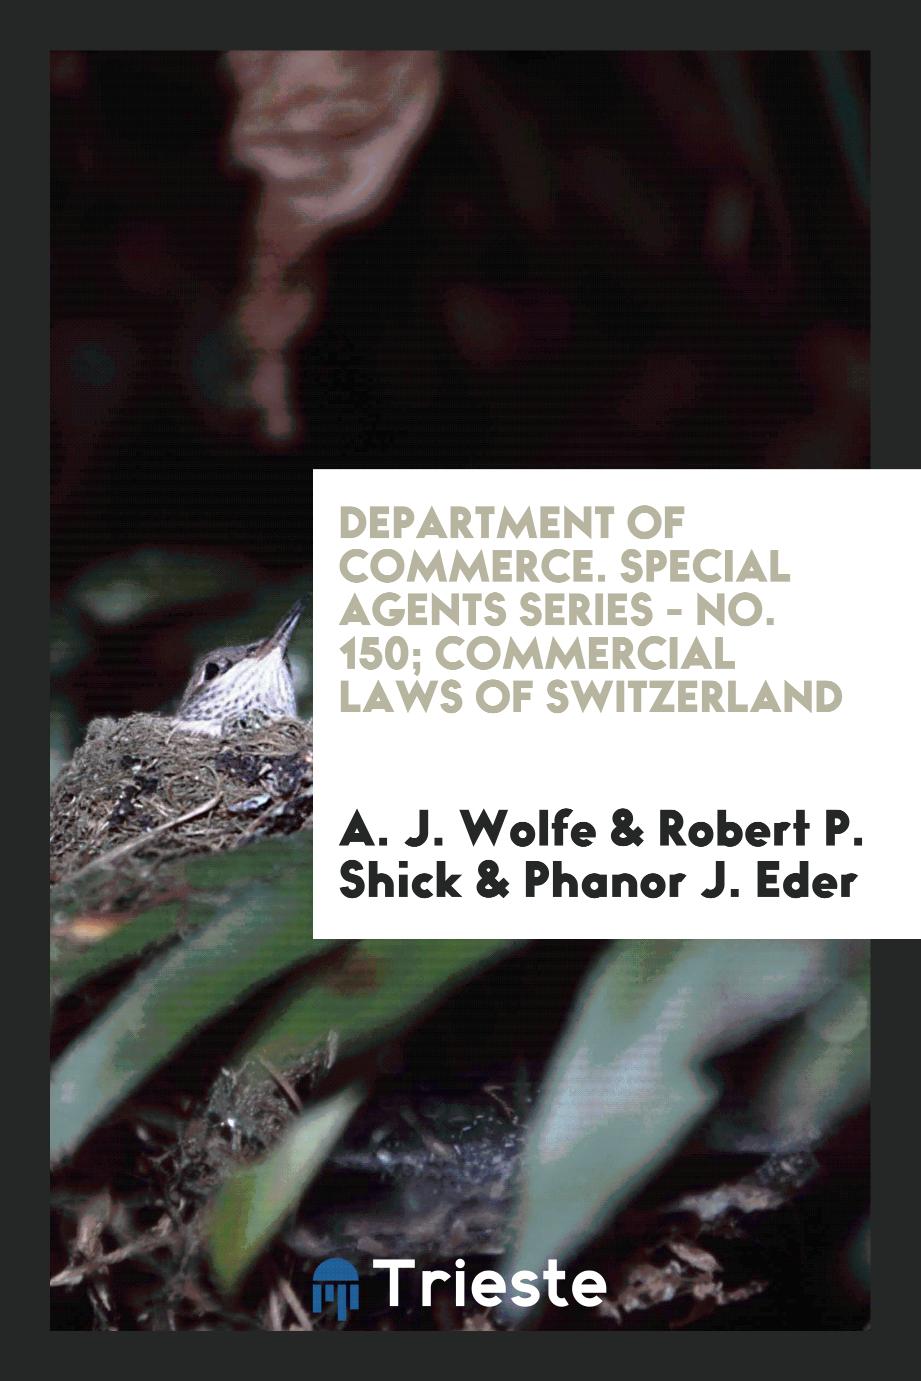 Department of commerce. Special Agents Series - No. 150; Commercial Laws of Switzerland